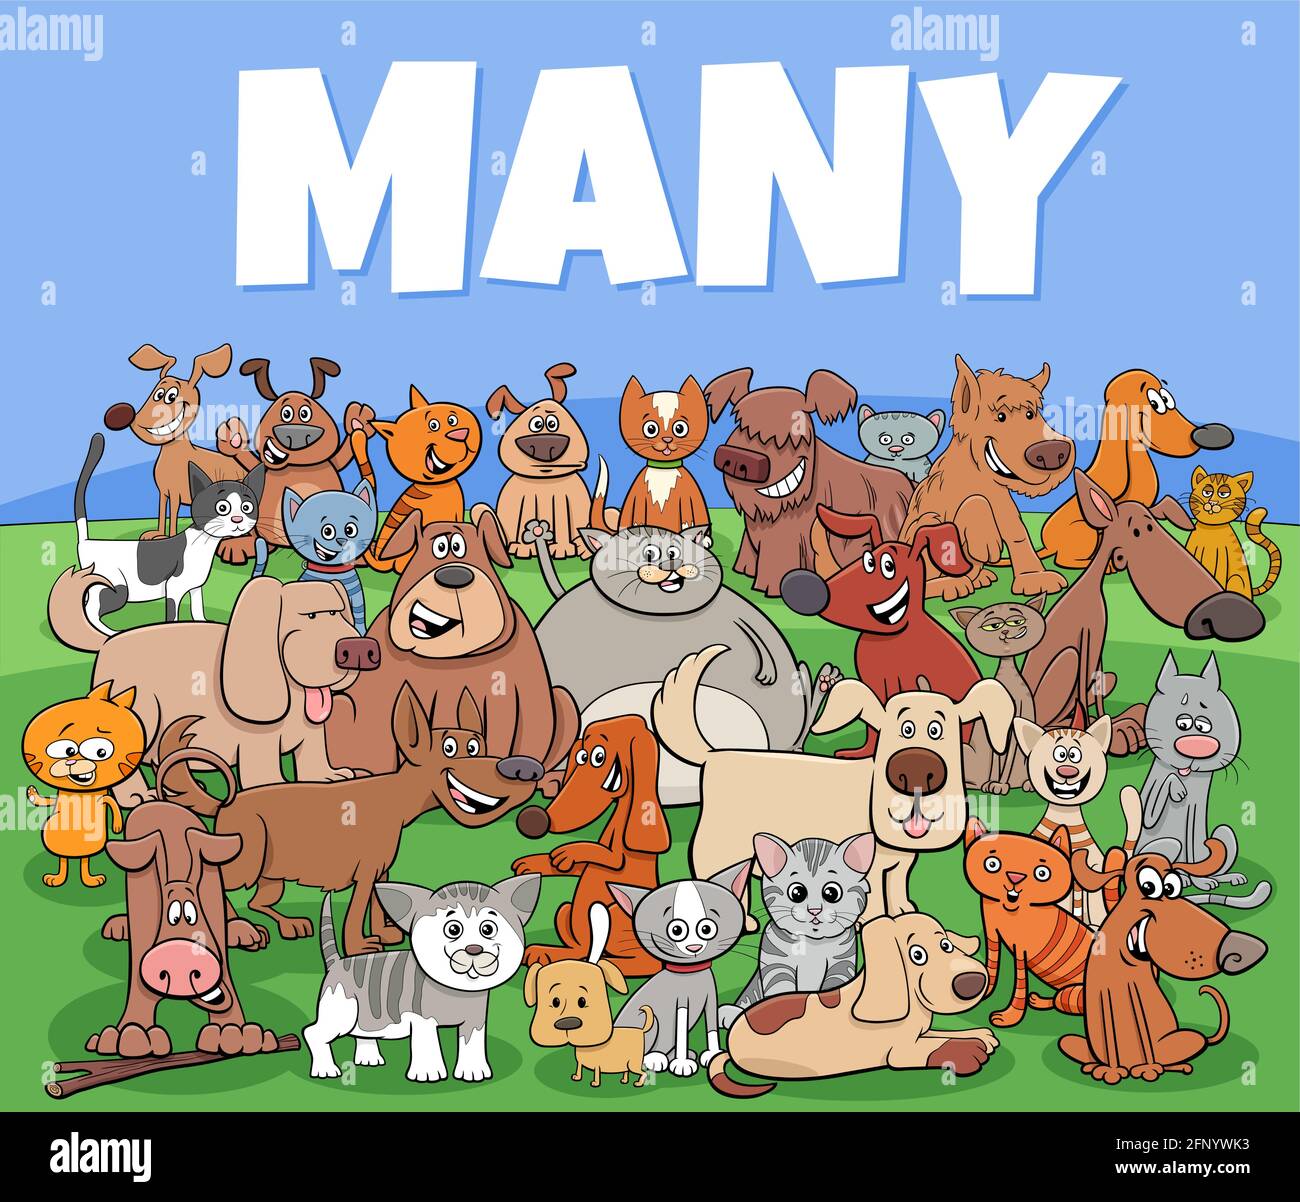 Cartoon illustration of many cats and dogs animal characters group Stock Vector